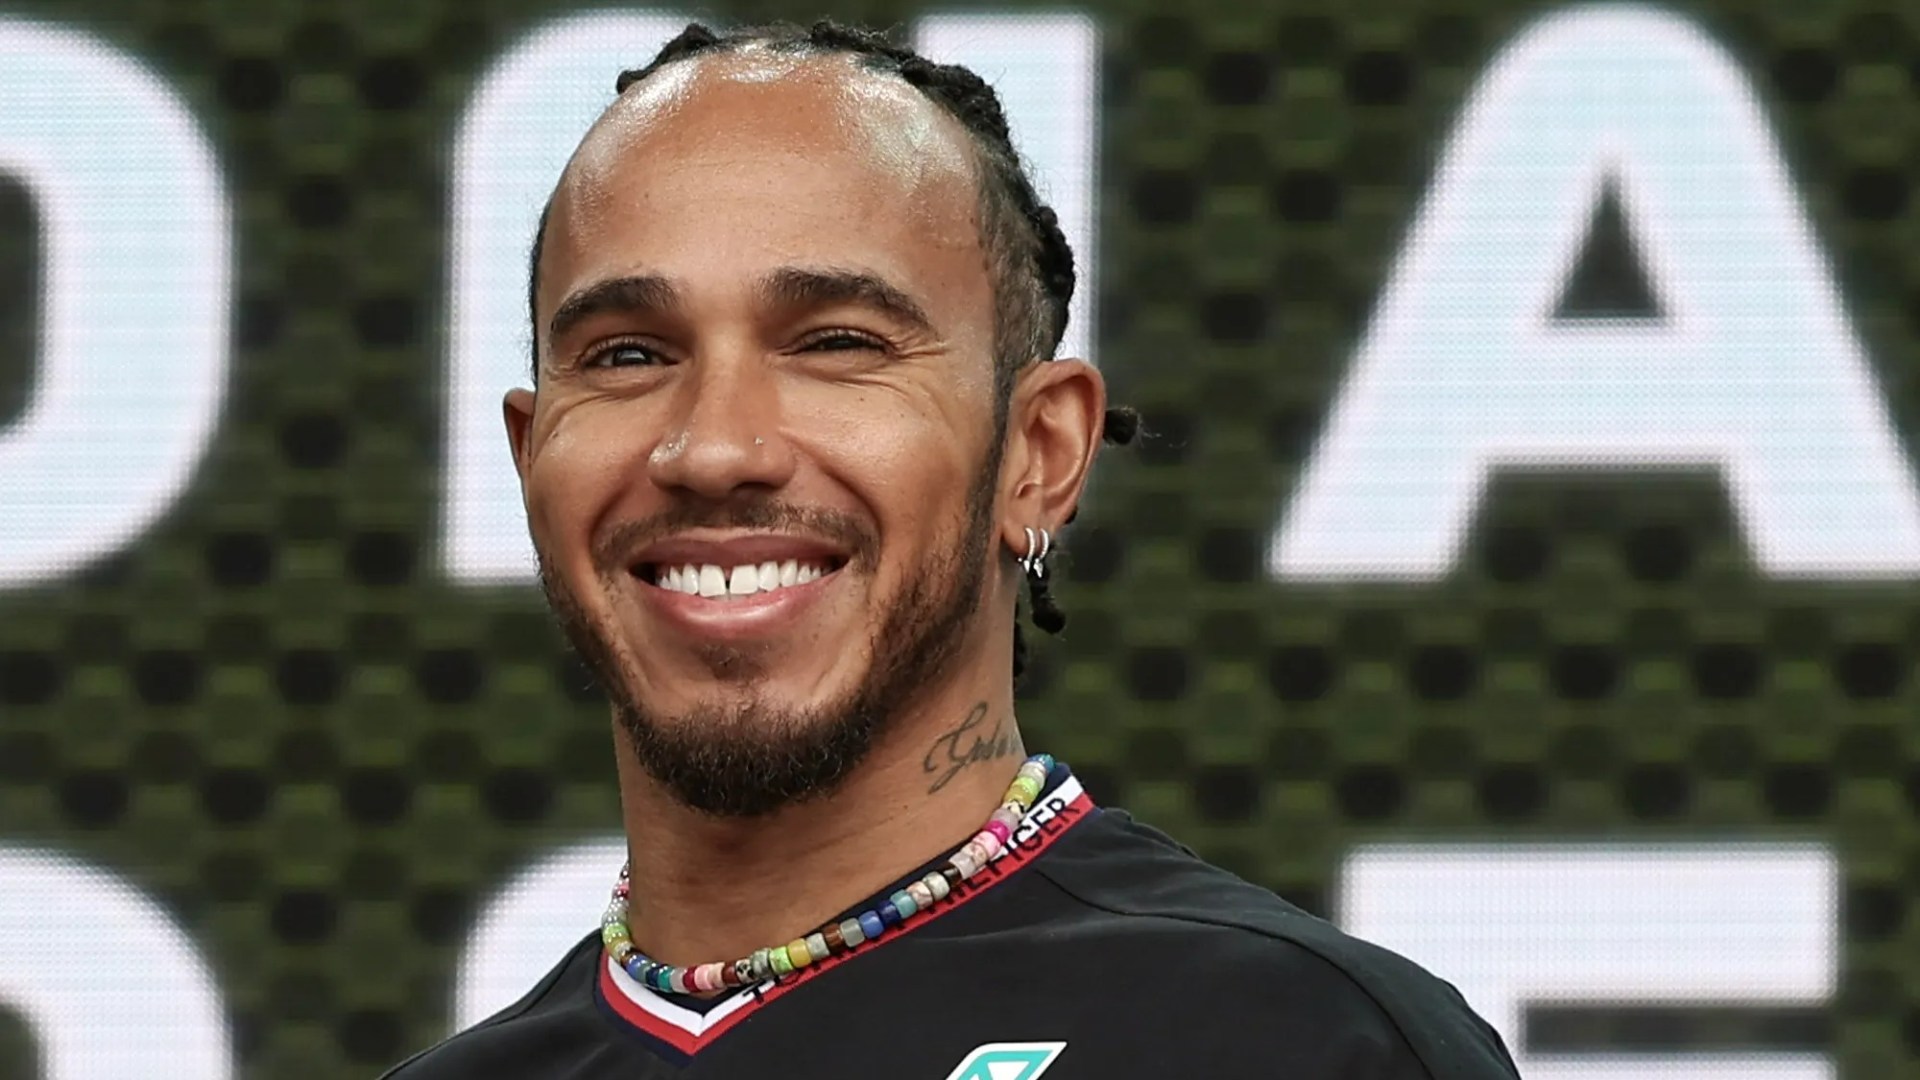 Lewis Hamilton only appeared in video game Fortnite after the makers of the game agreed to his bizarre request